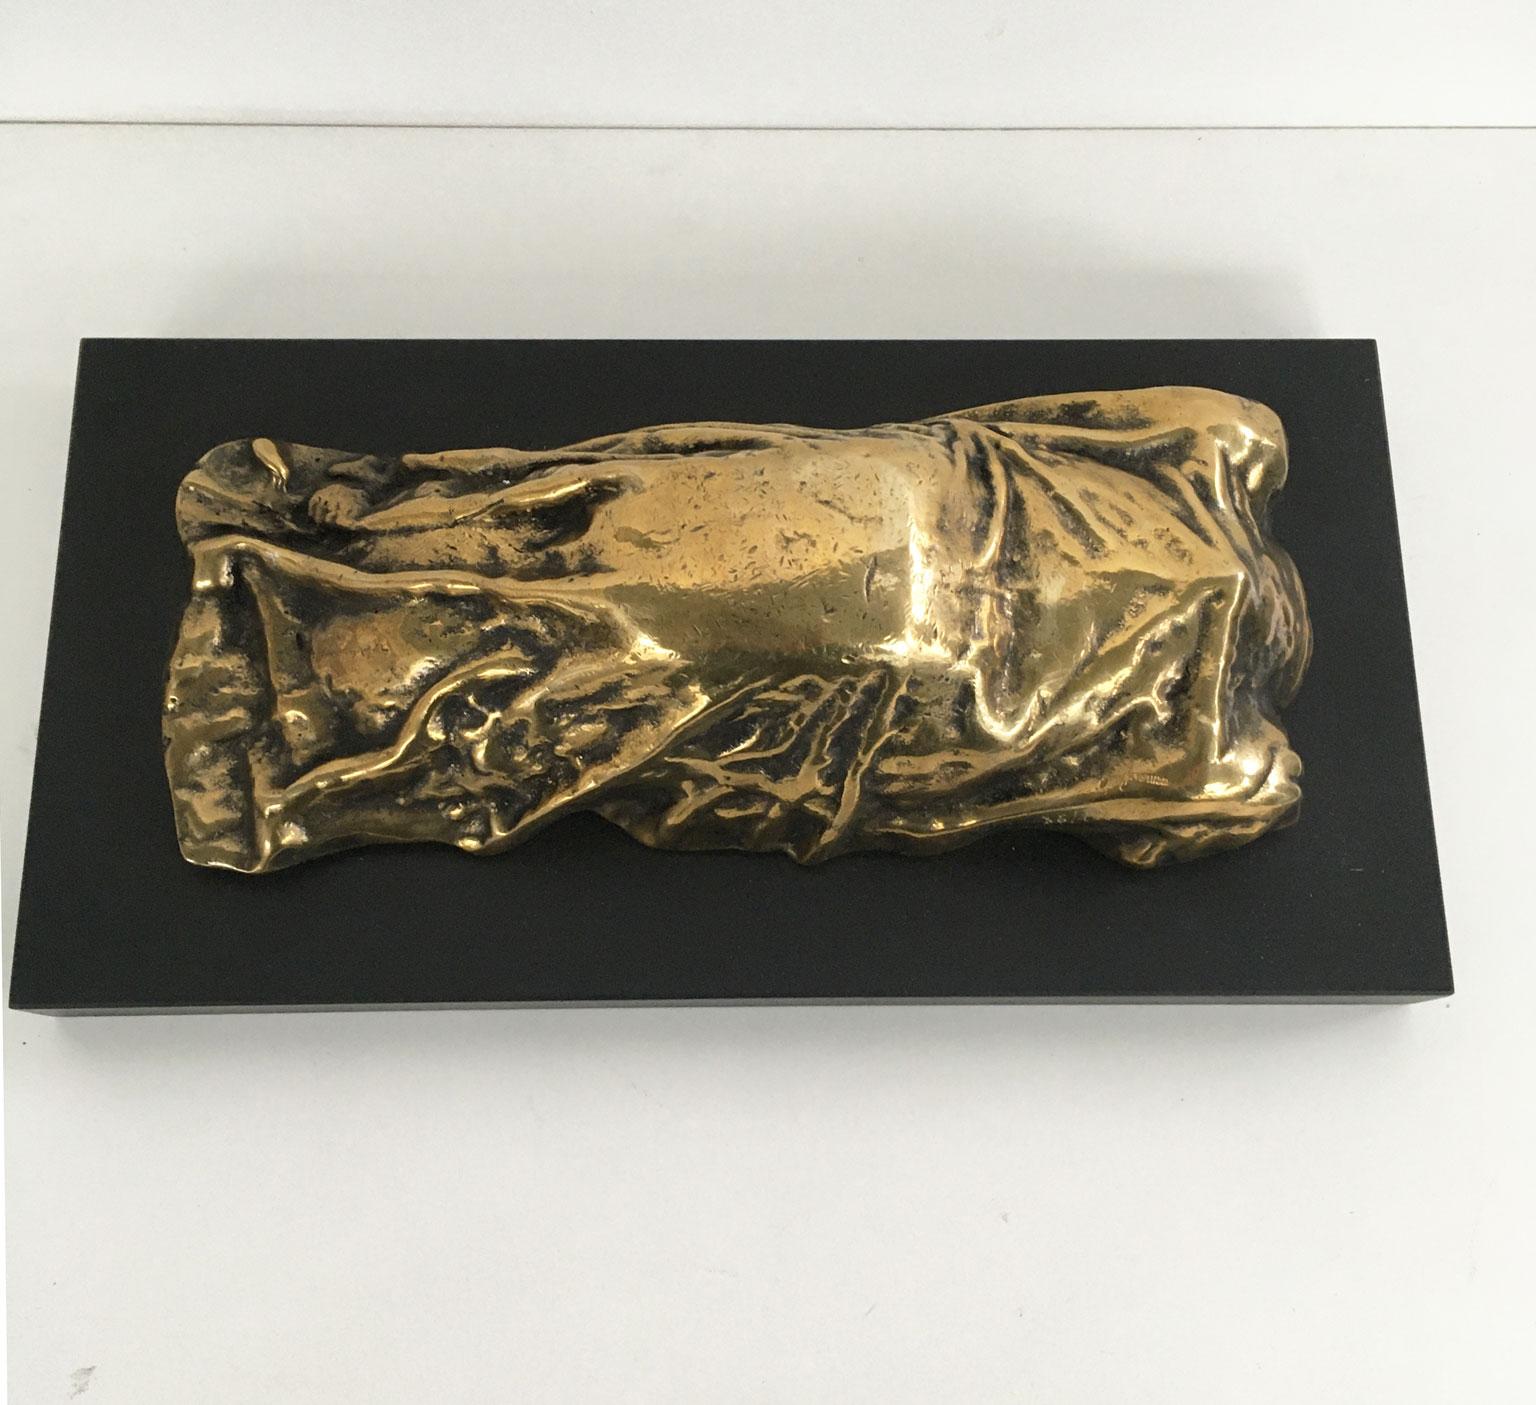 1980 Italy Bronze Abstract Sculpture by Furio Giovannacci Indianapolis For Sale 2